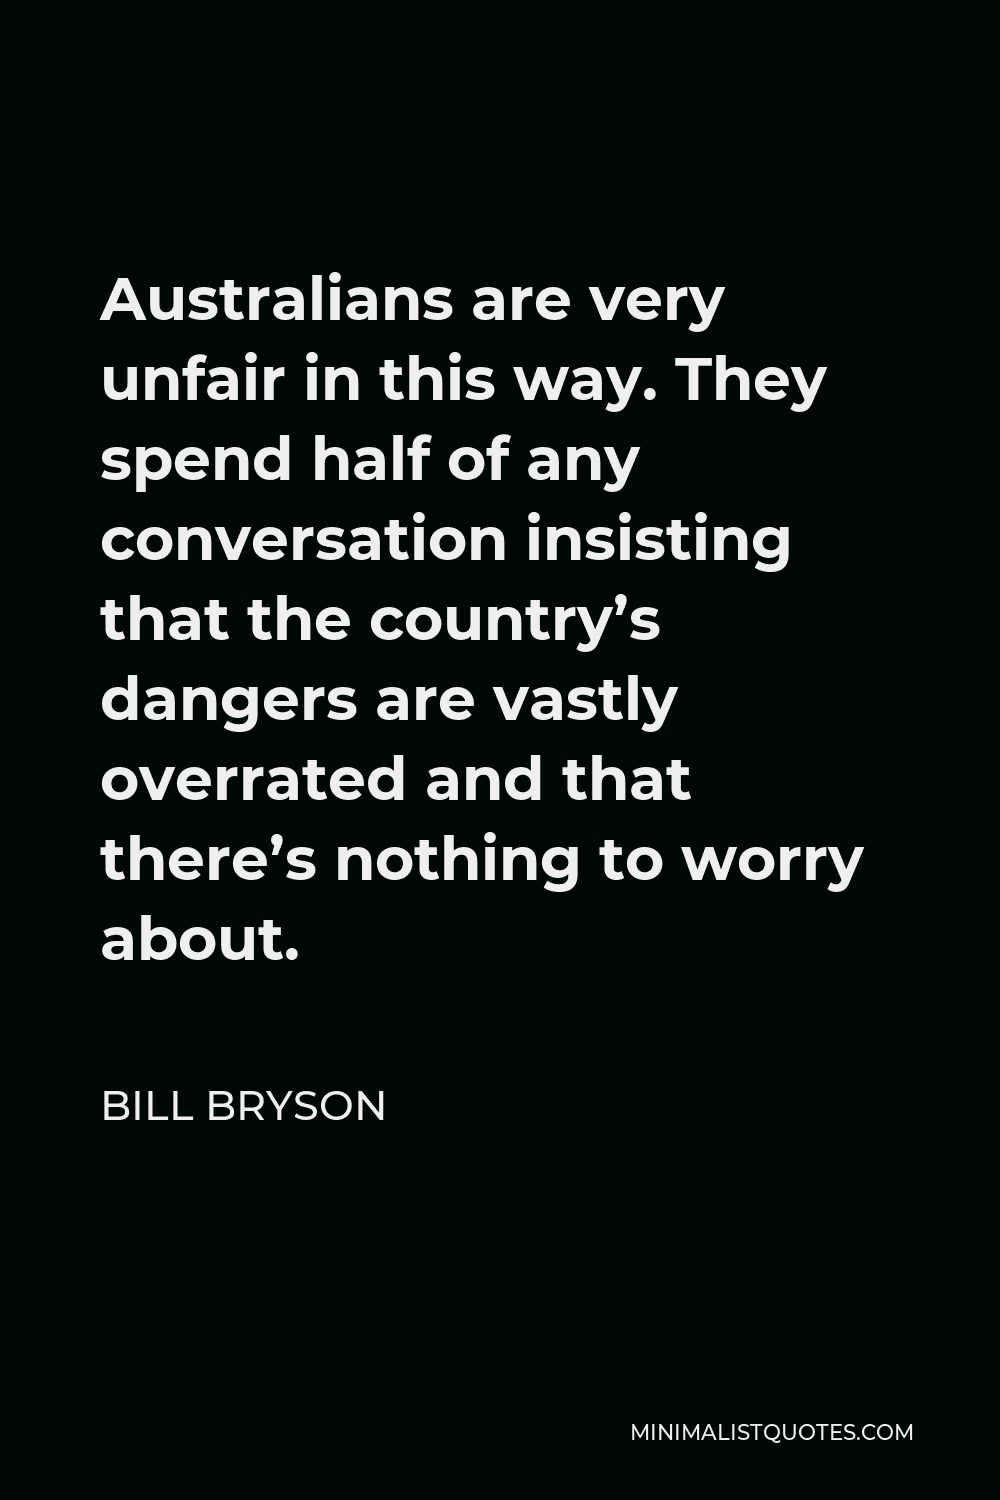 Bill Bryson Quote - Australians are very unfair in this way. They spend half of any conversation insisting that the country’s dangers are vastly overrated and that there’s nothing to worry about.